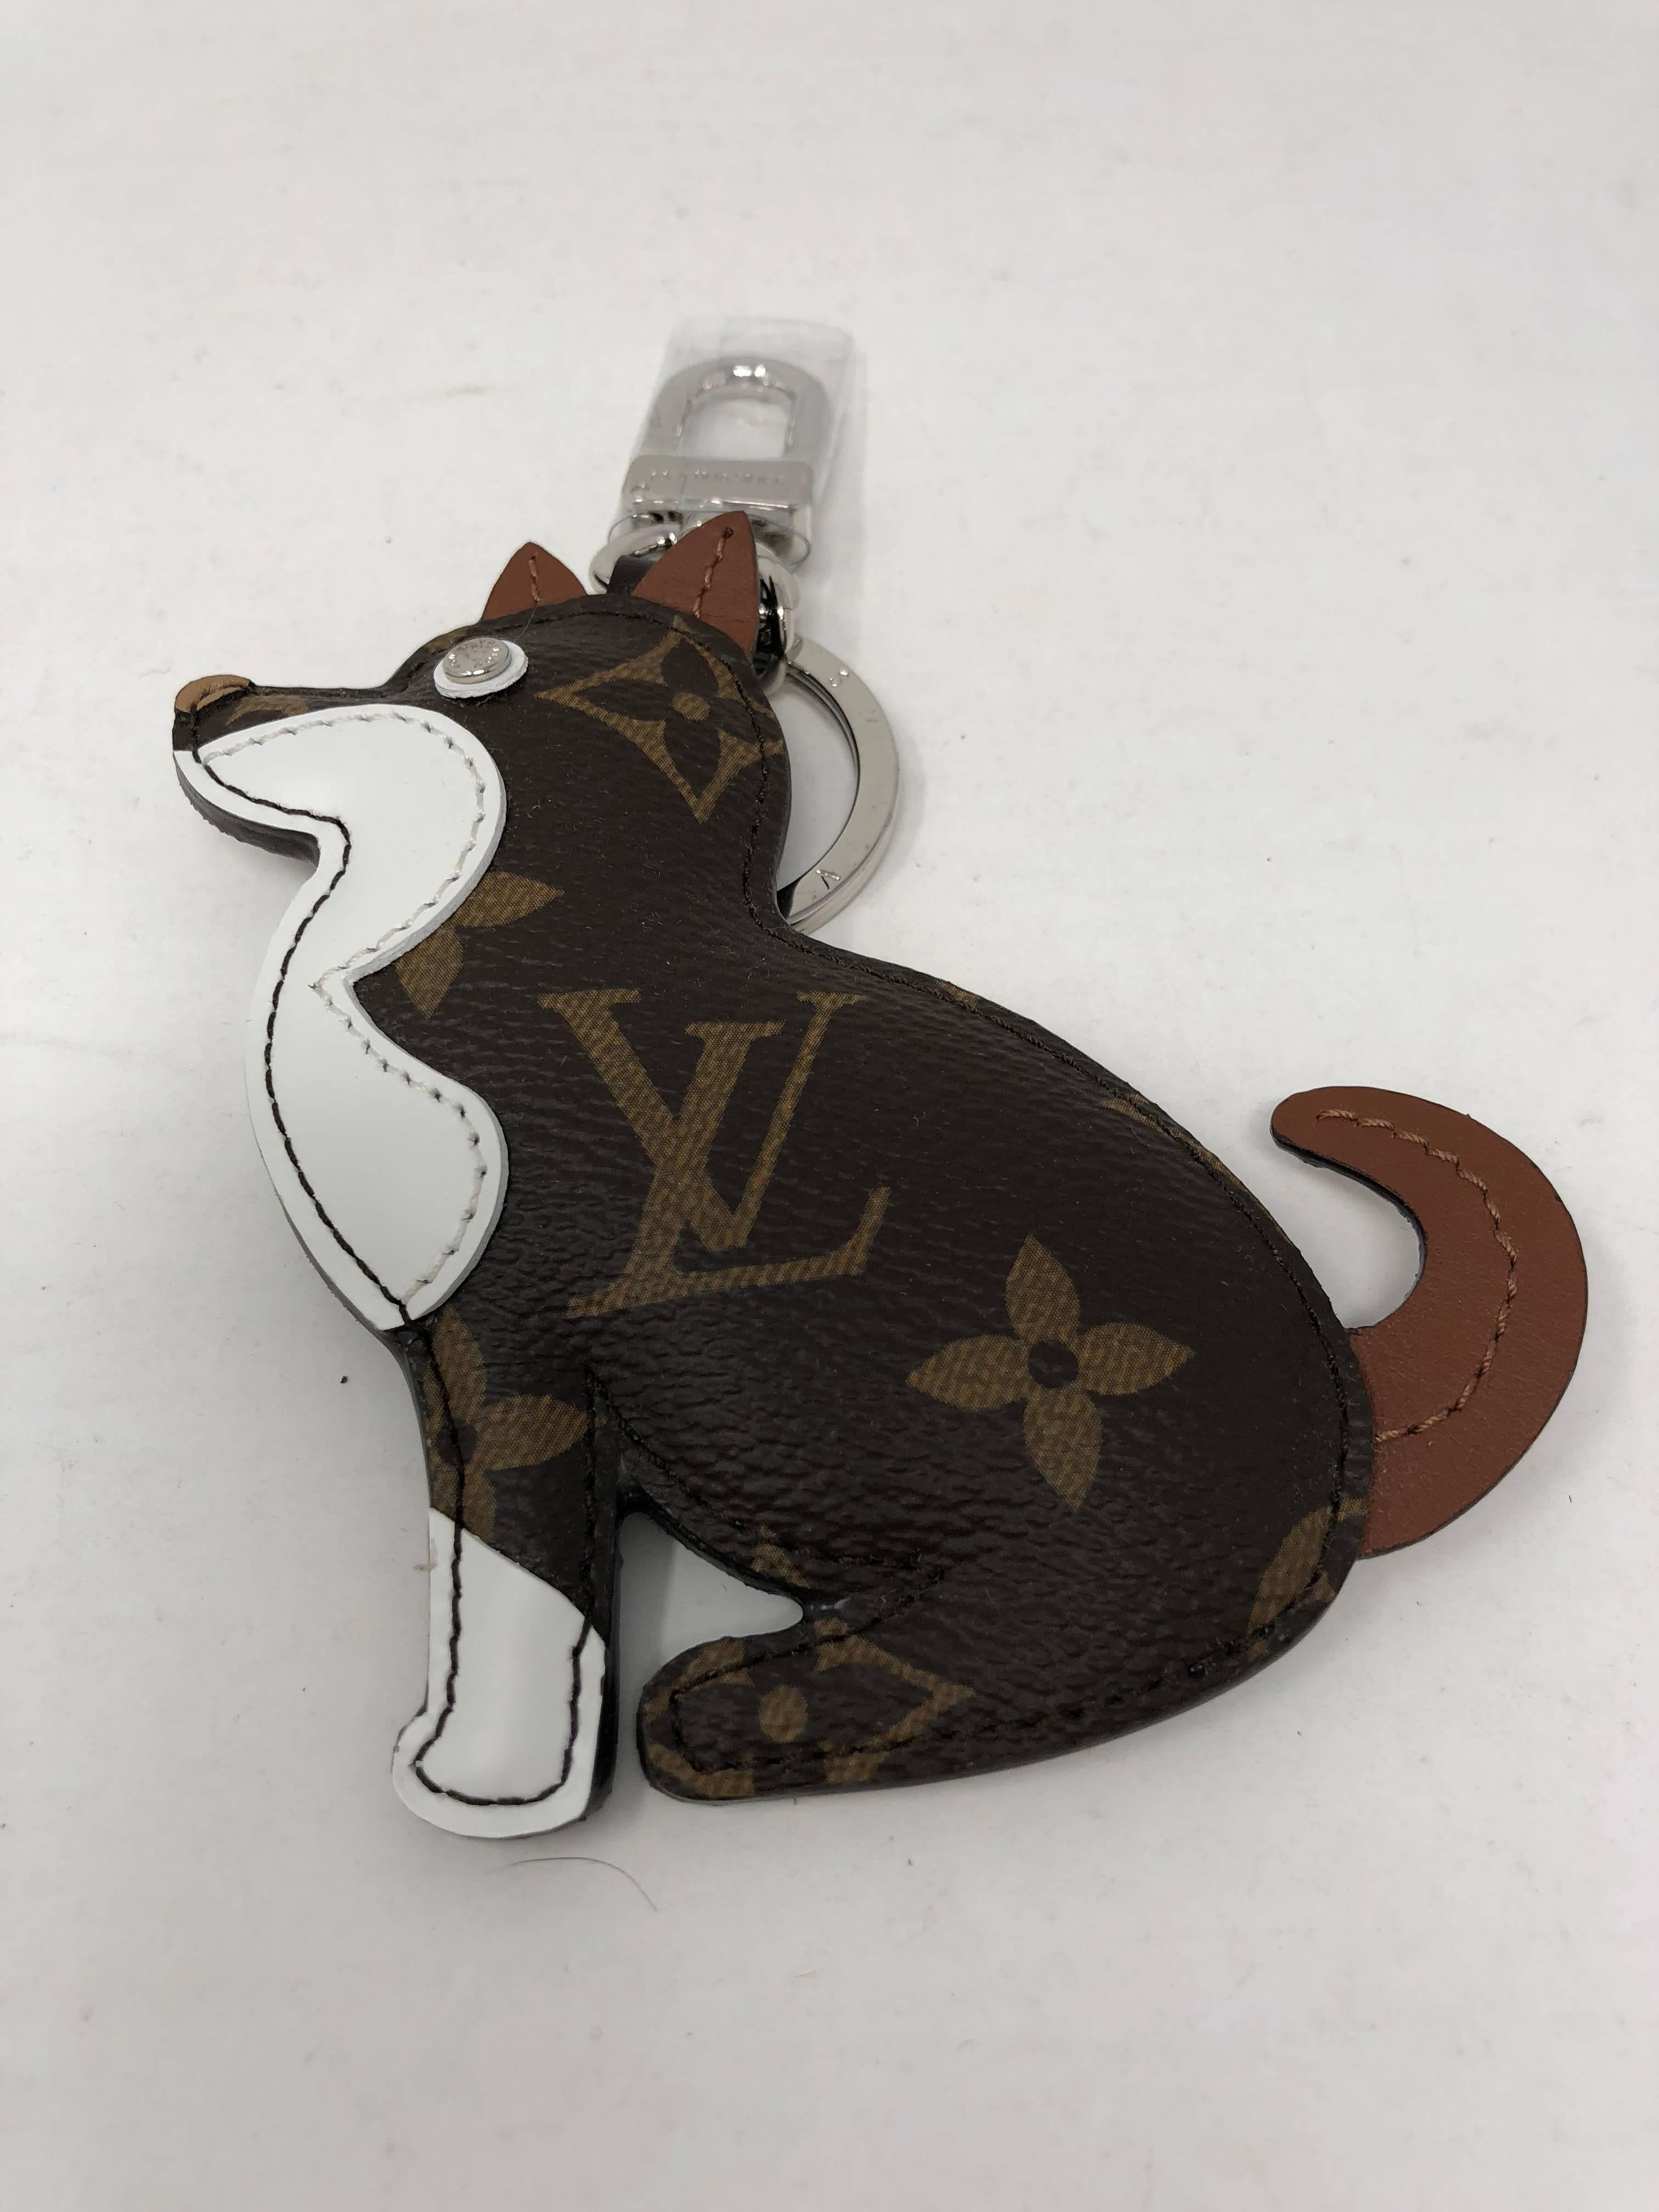 Louis Vuitton Dog Charm and Key Holder with monogram canvas and calf-leather trim. Eye made with a trunk stud. Sold out and limited edition. Part of a collection that celebrates the Chinese Zodiac. Brand new from 2018 and comes with dust cover and